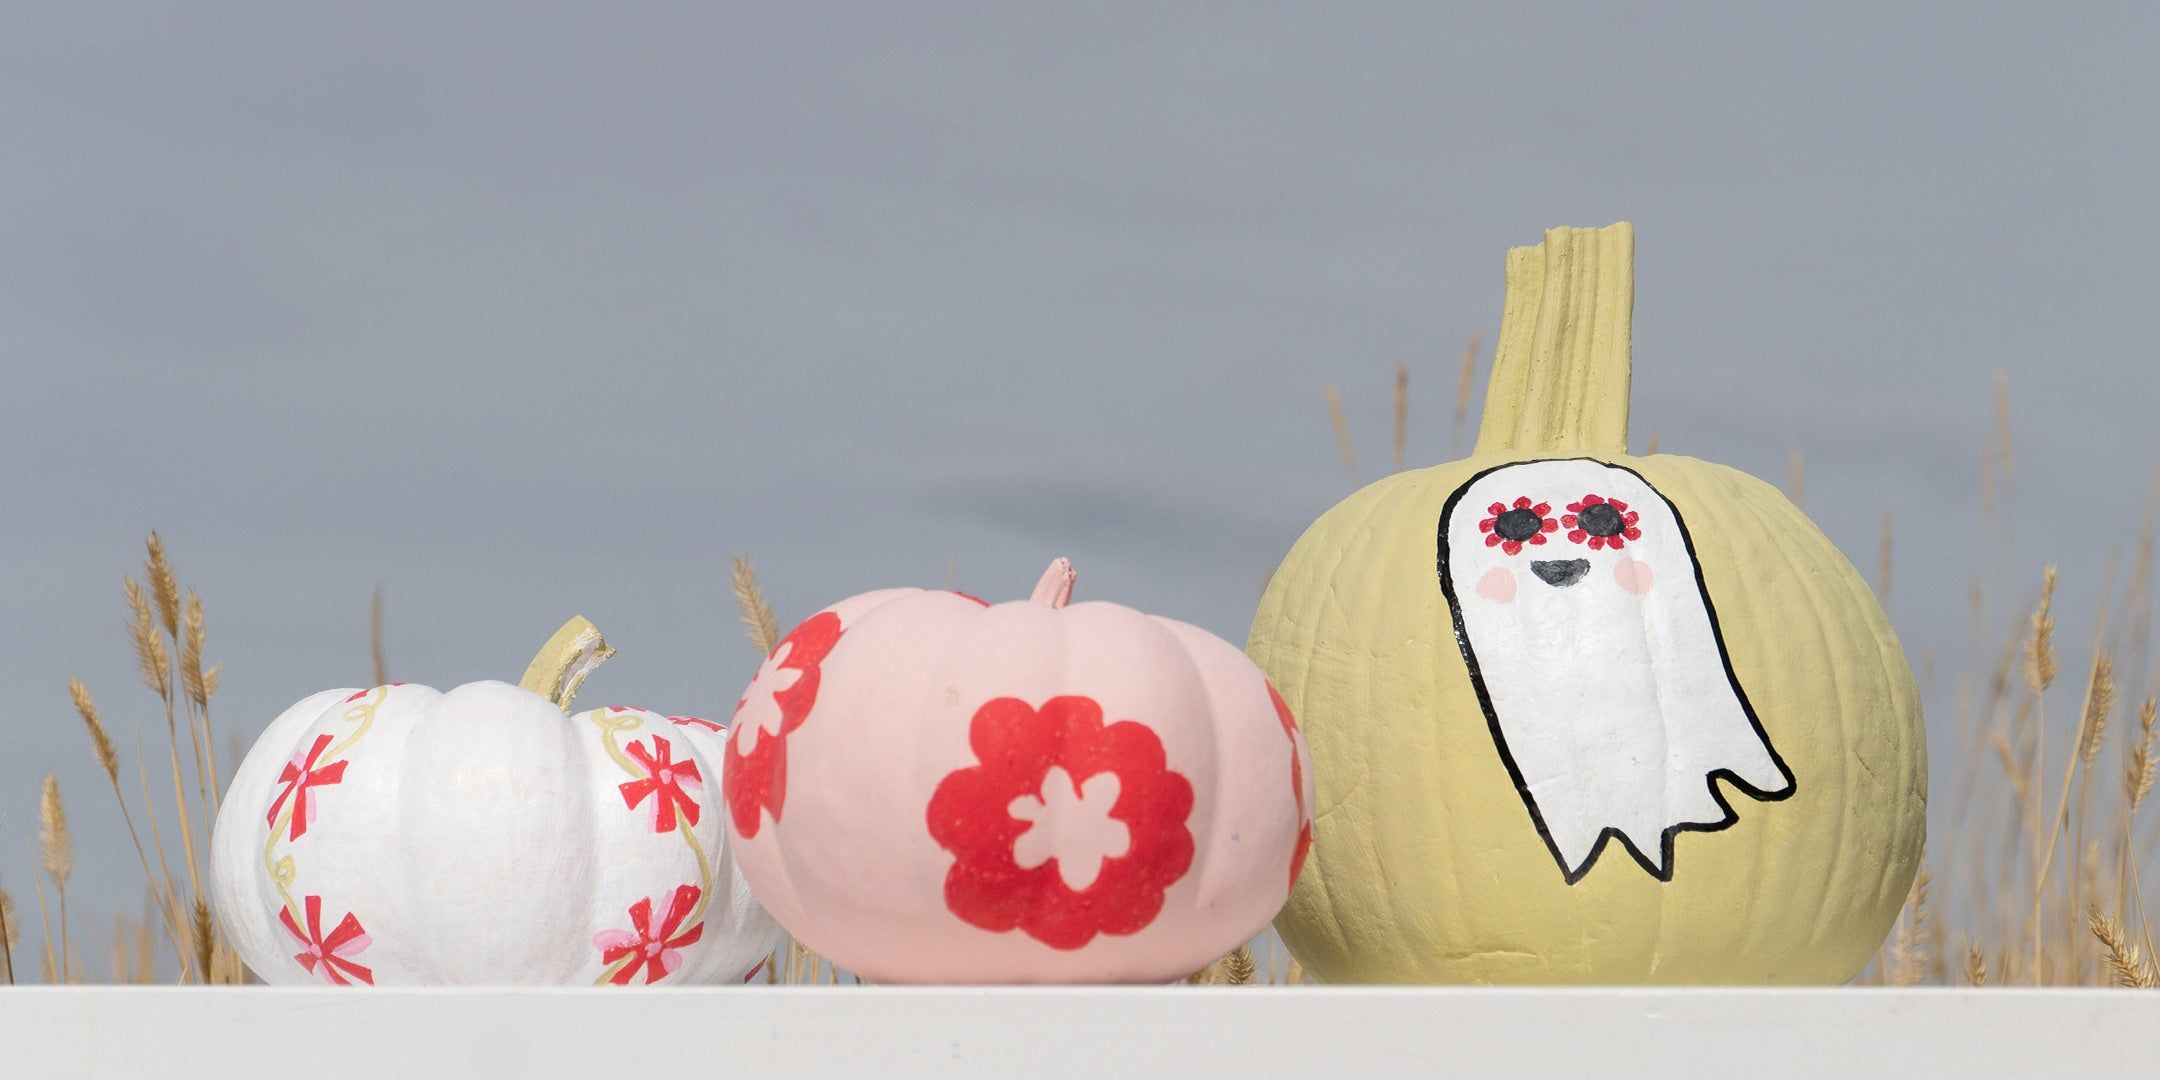 painted gourds of different shapes with a doll face, flowers, vote and blue and white stripe